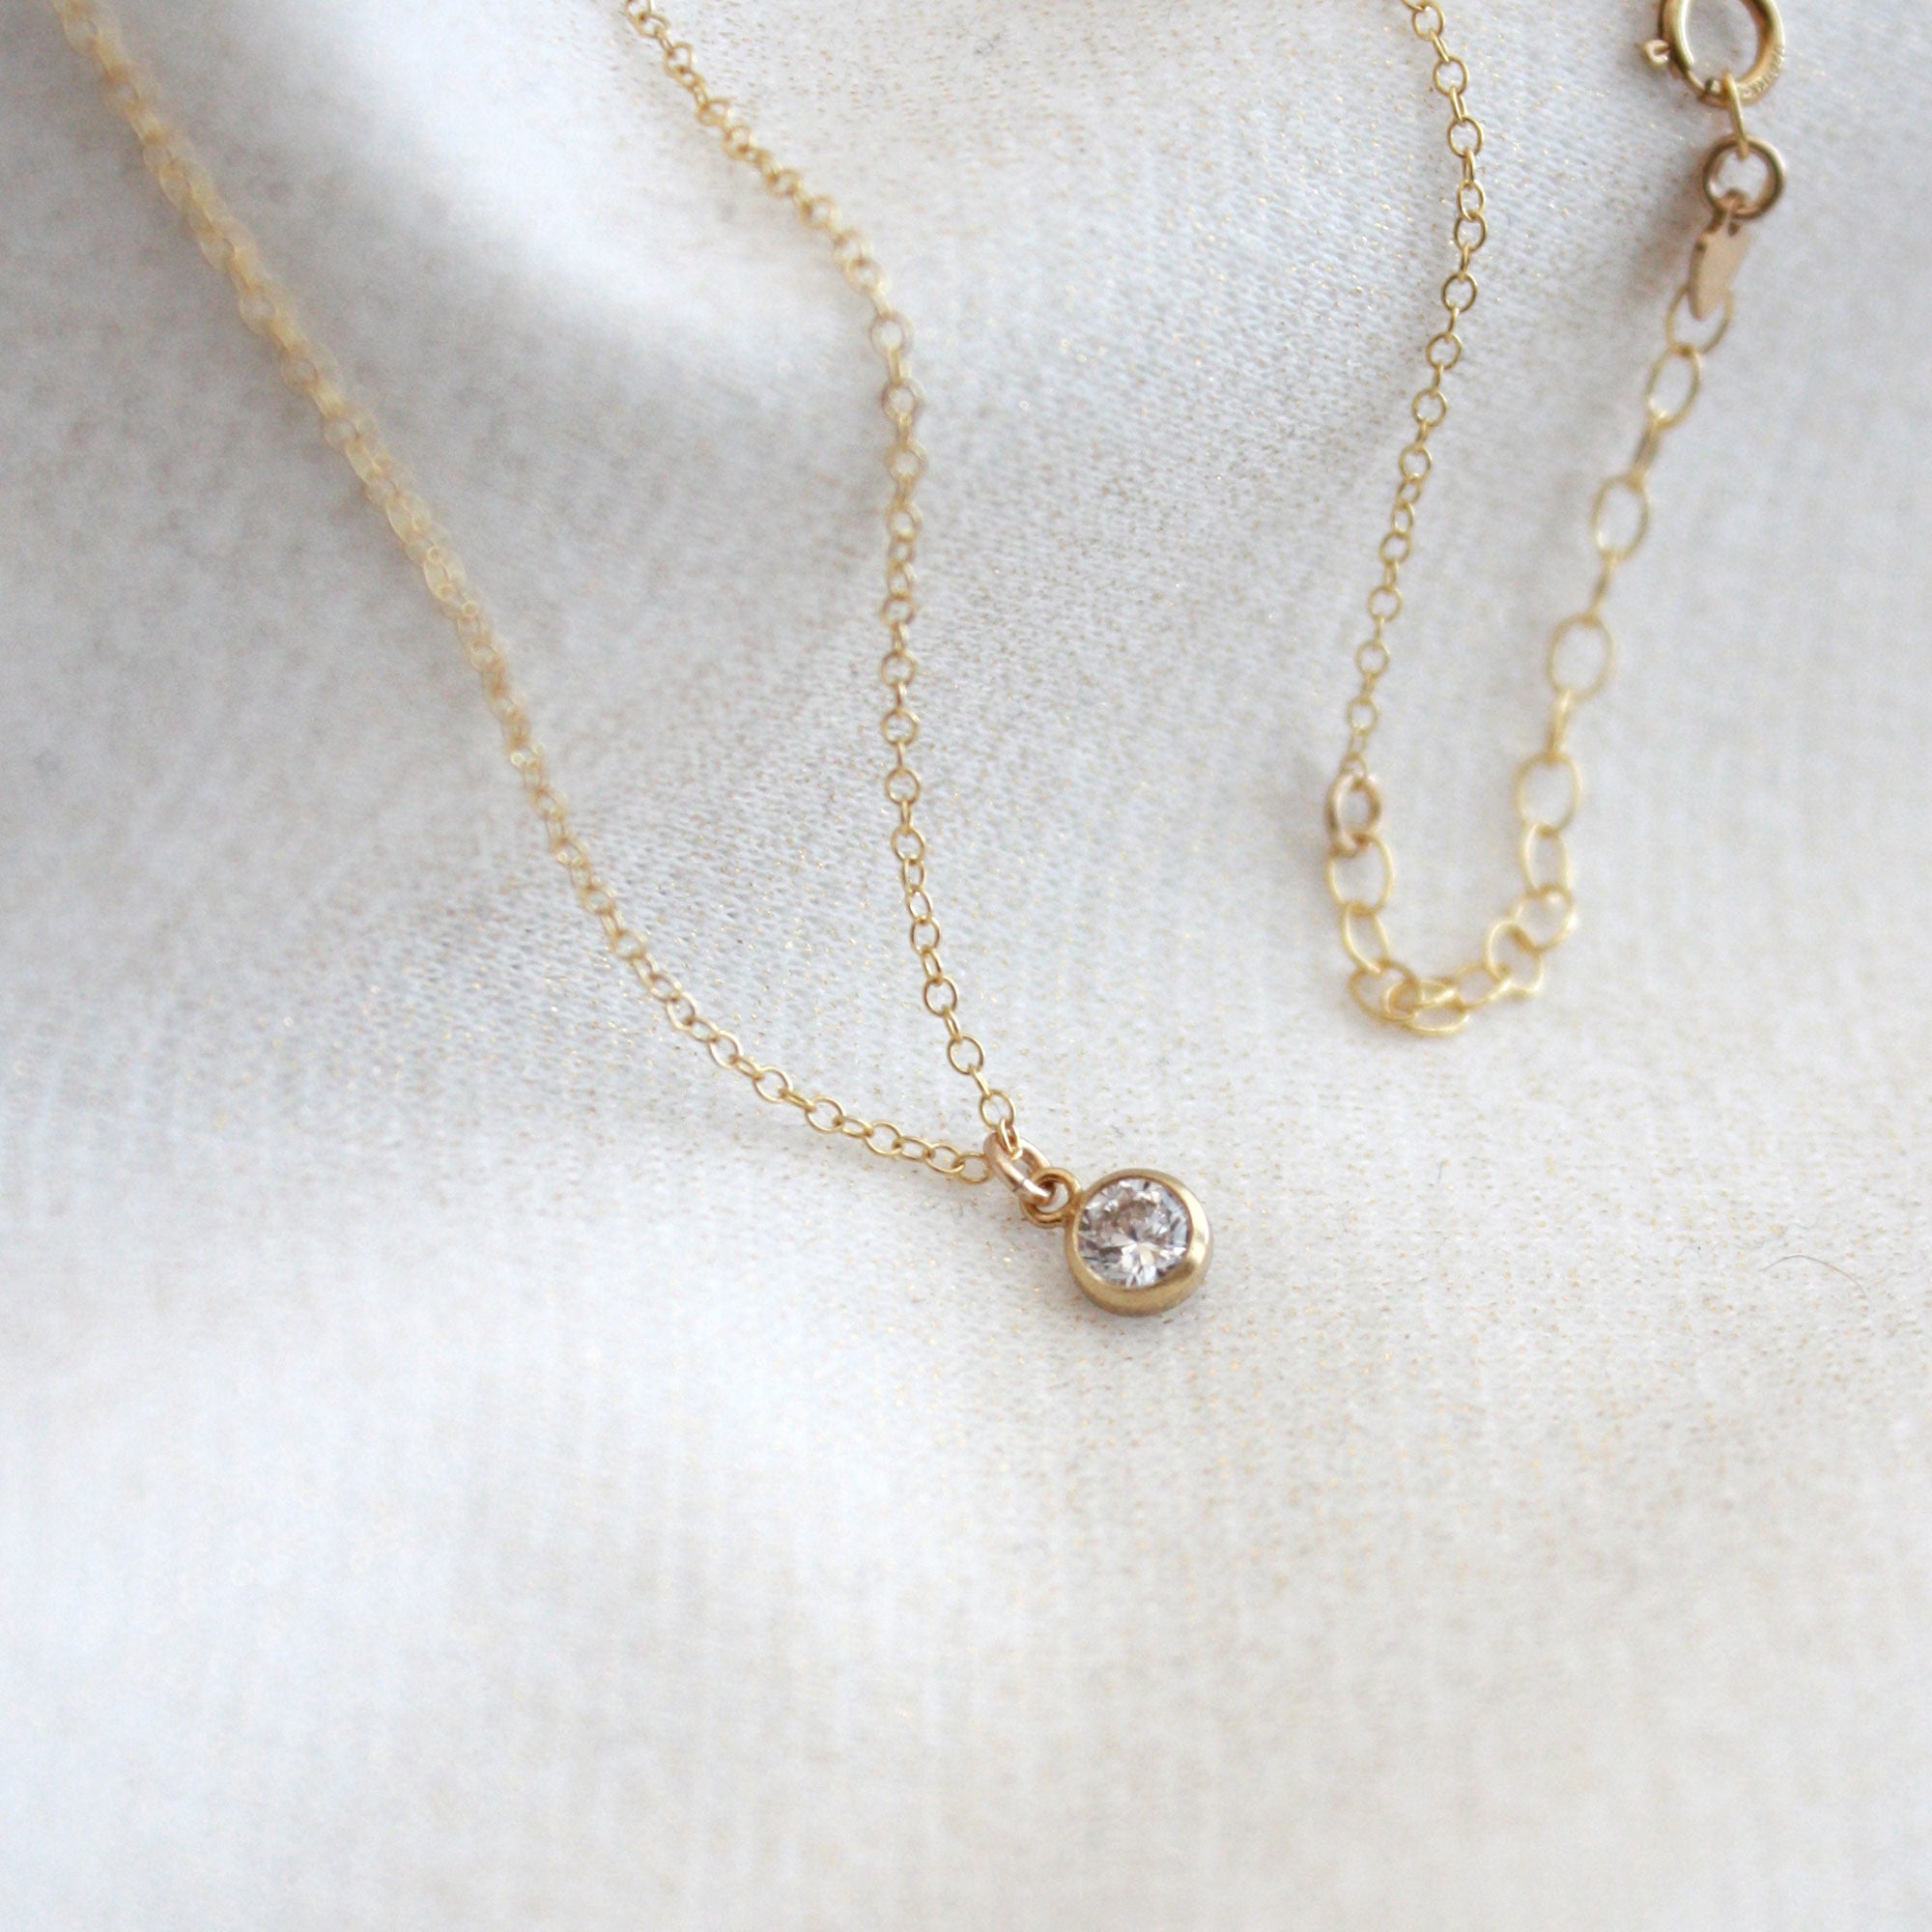 Crystal Clear Quartz Necklace - Floating diamond necklace - Delicate G -  Urban Carats